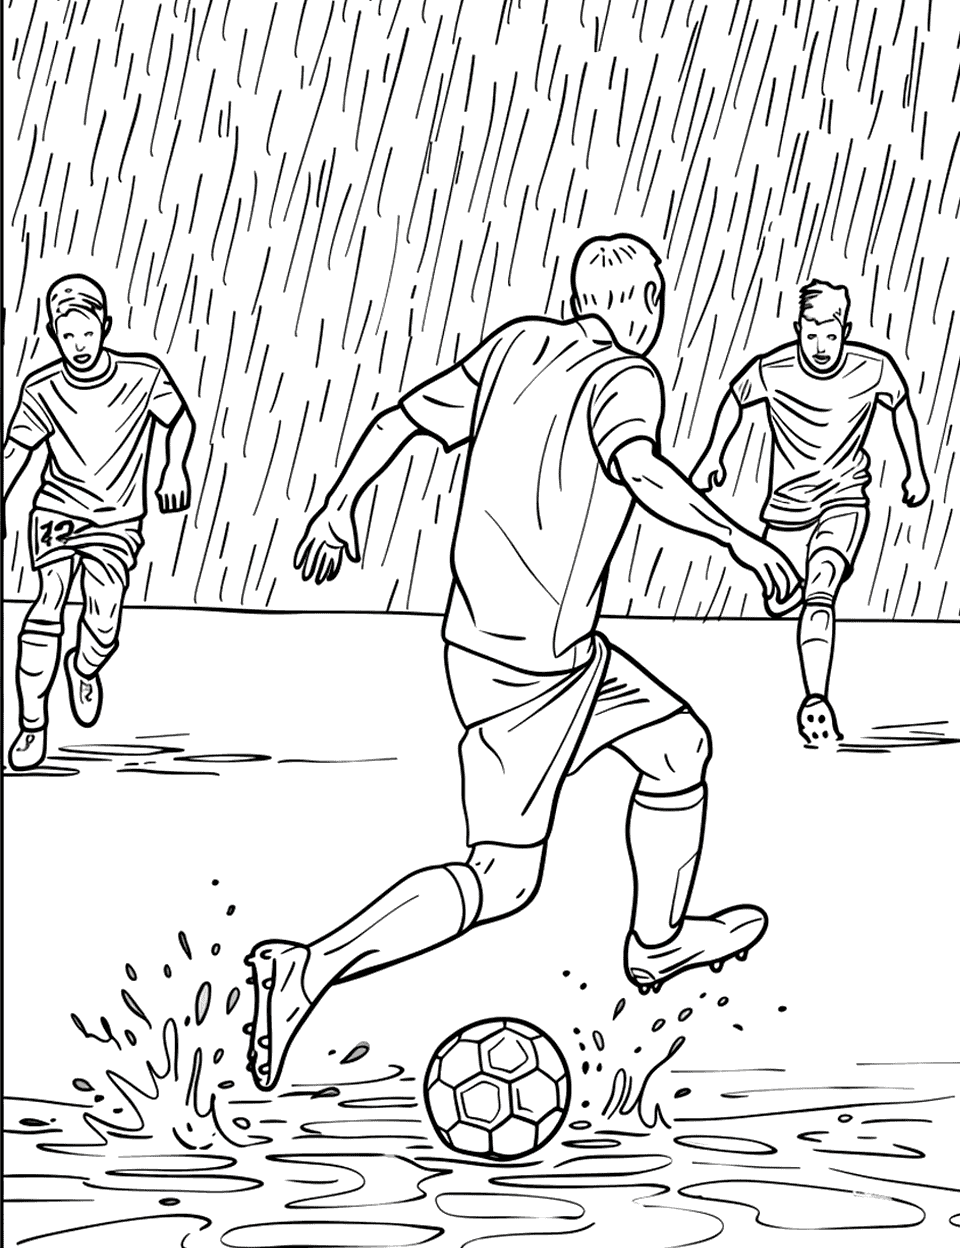 Rainy Day Soccer Match Coloring Page - Players competing in a soccer match while rain pours down, splashing in puddles.